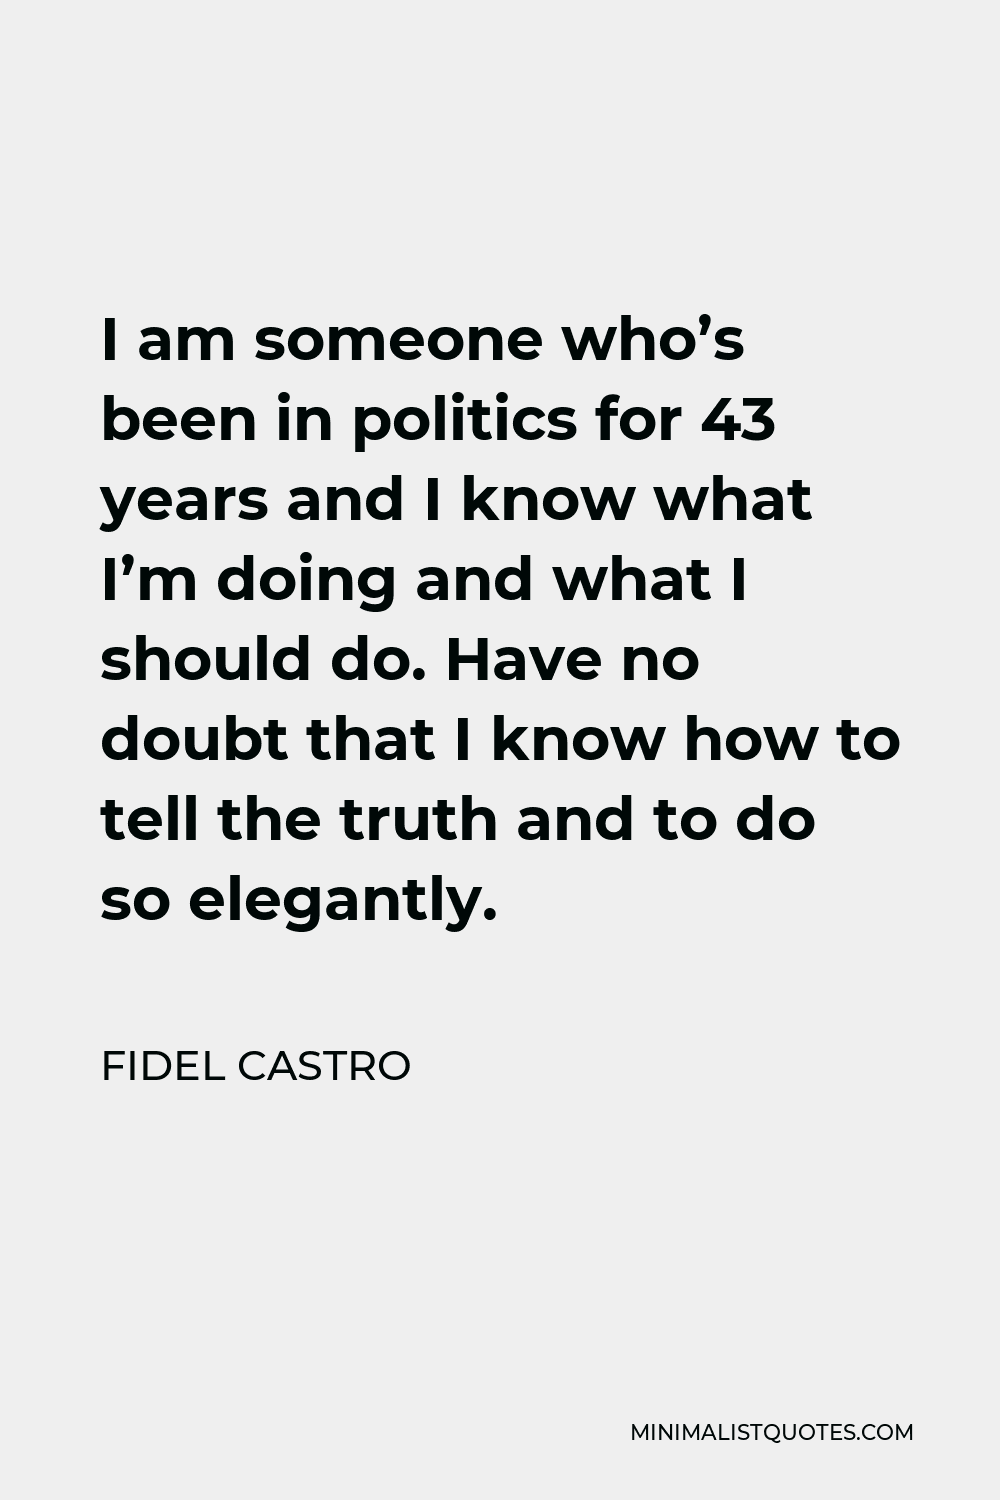 Fidel Castro Quote - I am someone who’s been in politics for 43 years and I know what I’m doing and what I should do. Have no doubt that I know how to tell the truth and to do so elegantly.